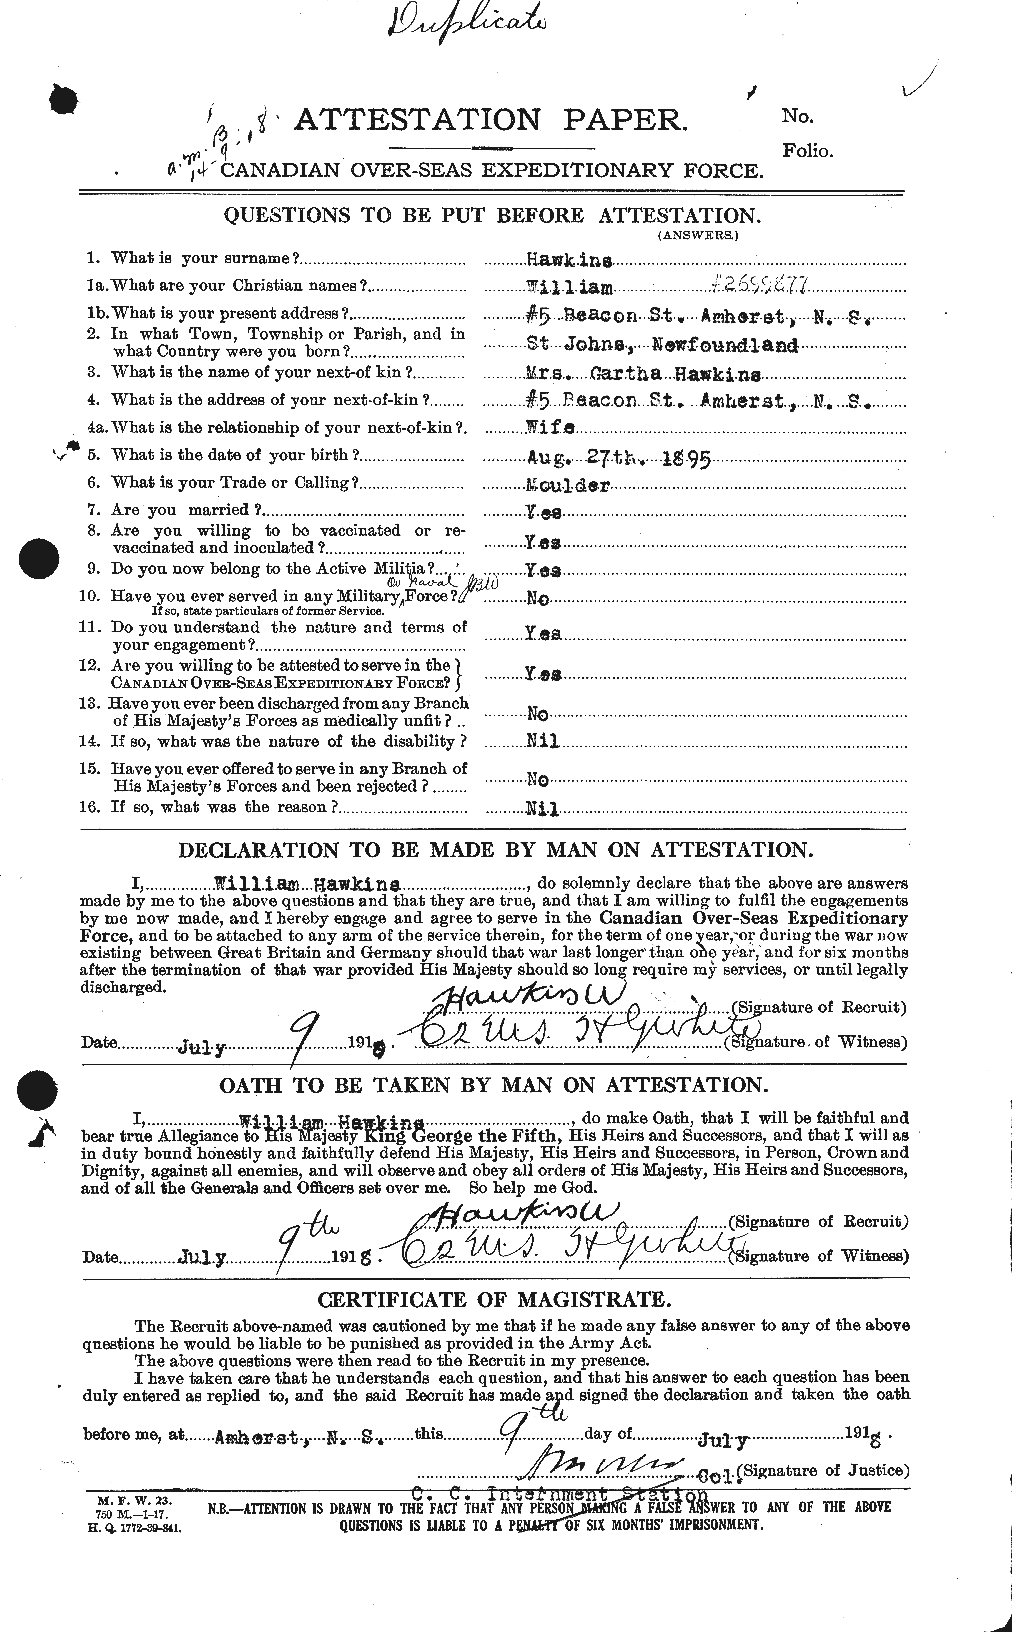 Personnel Records of the First World War - CEF 385633a